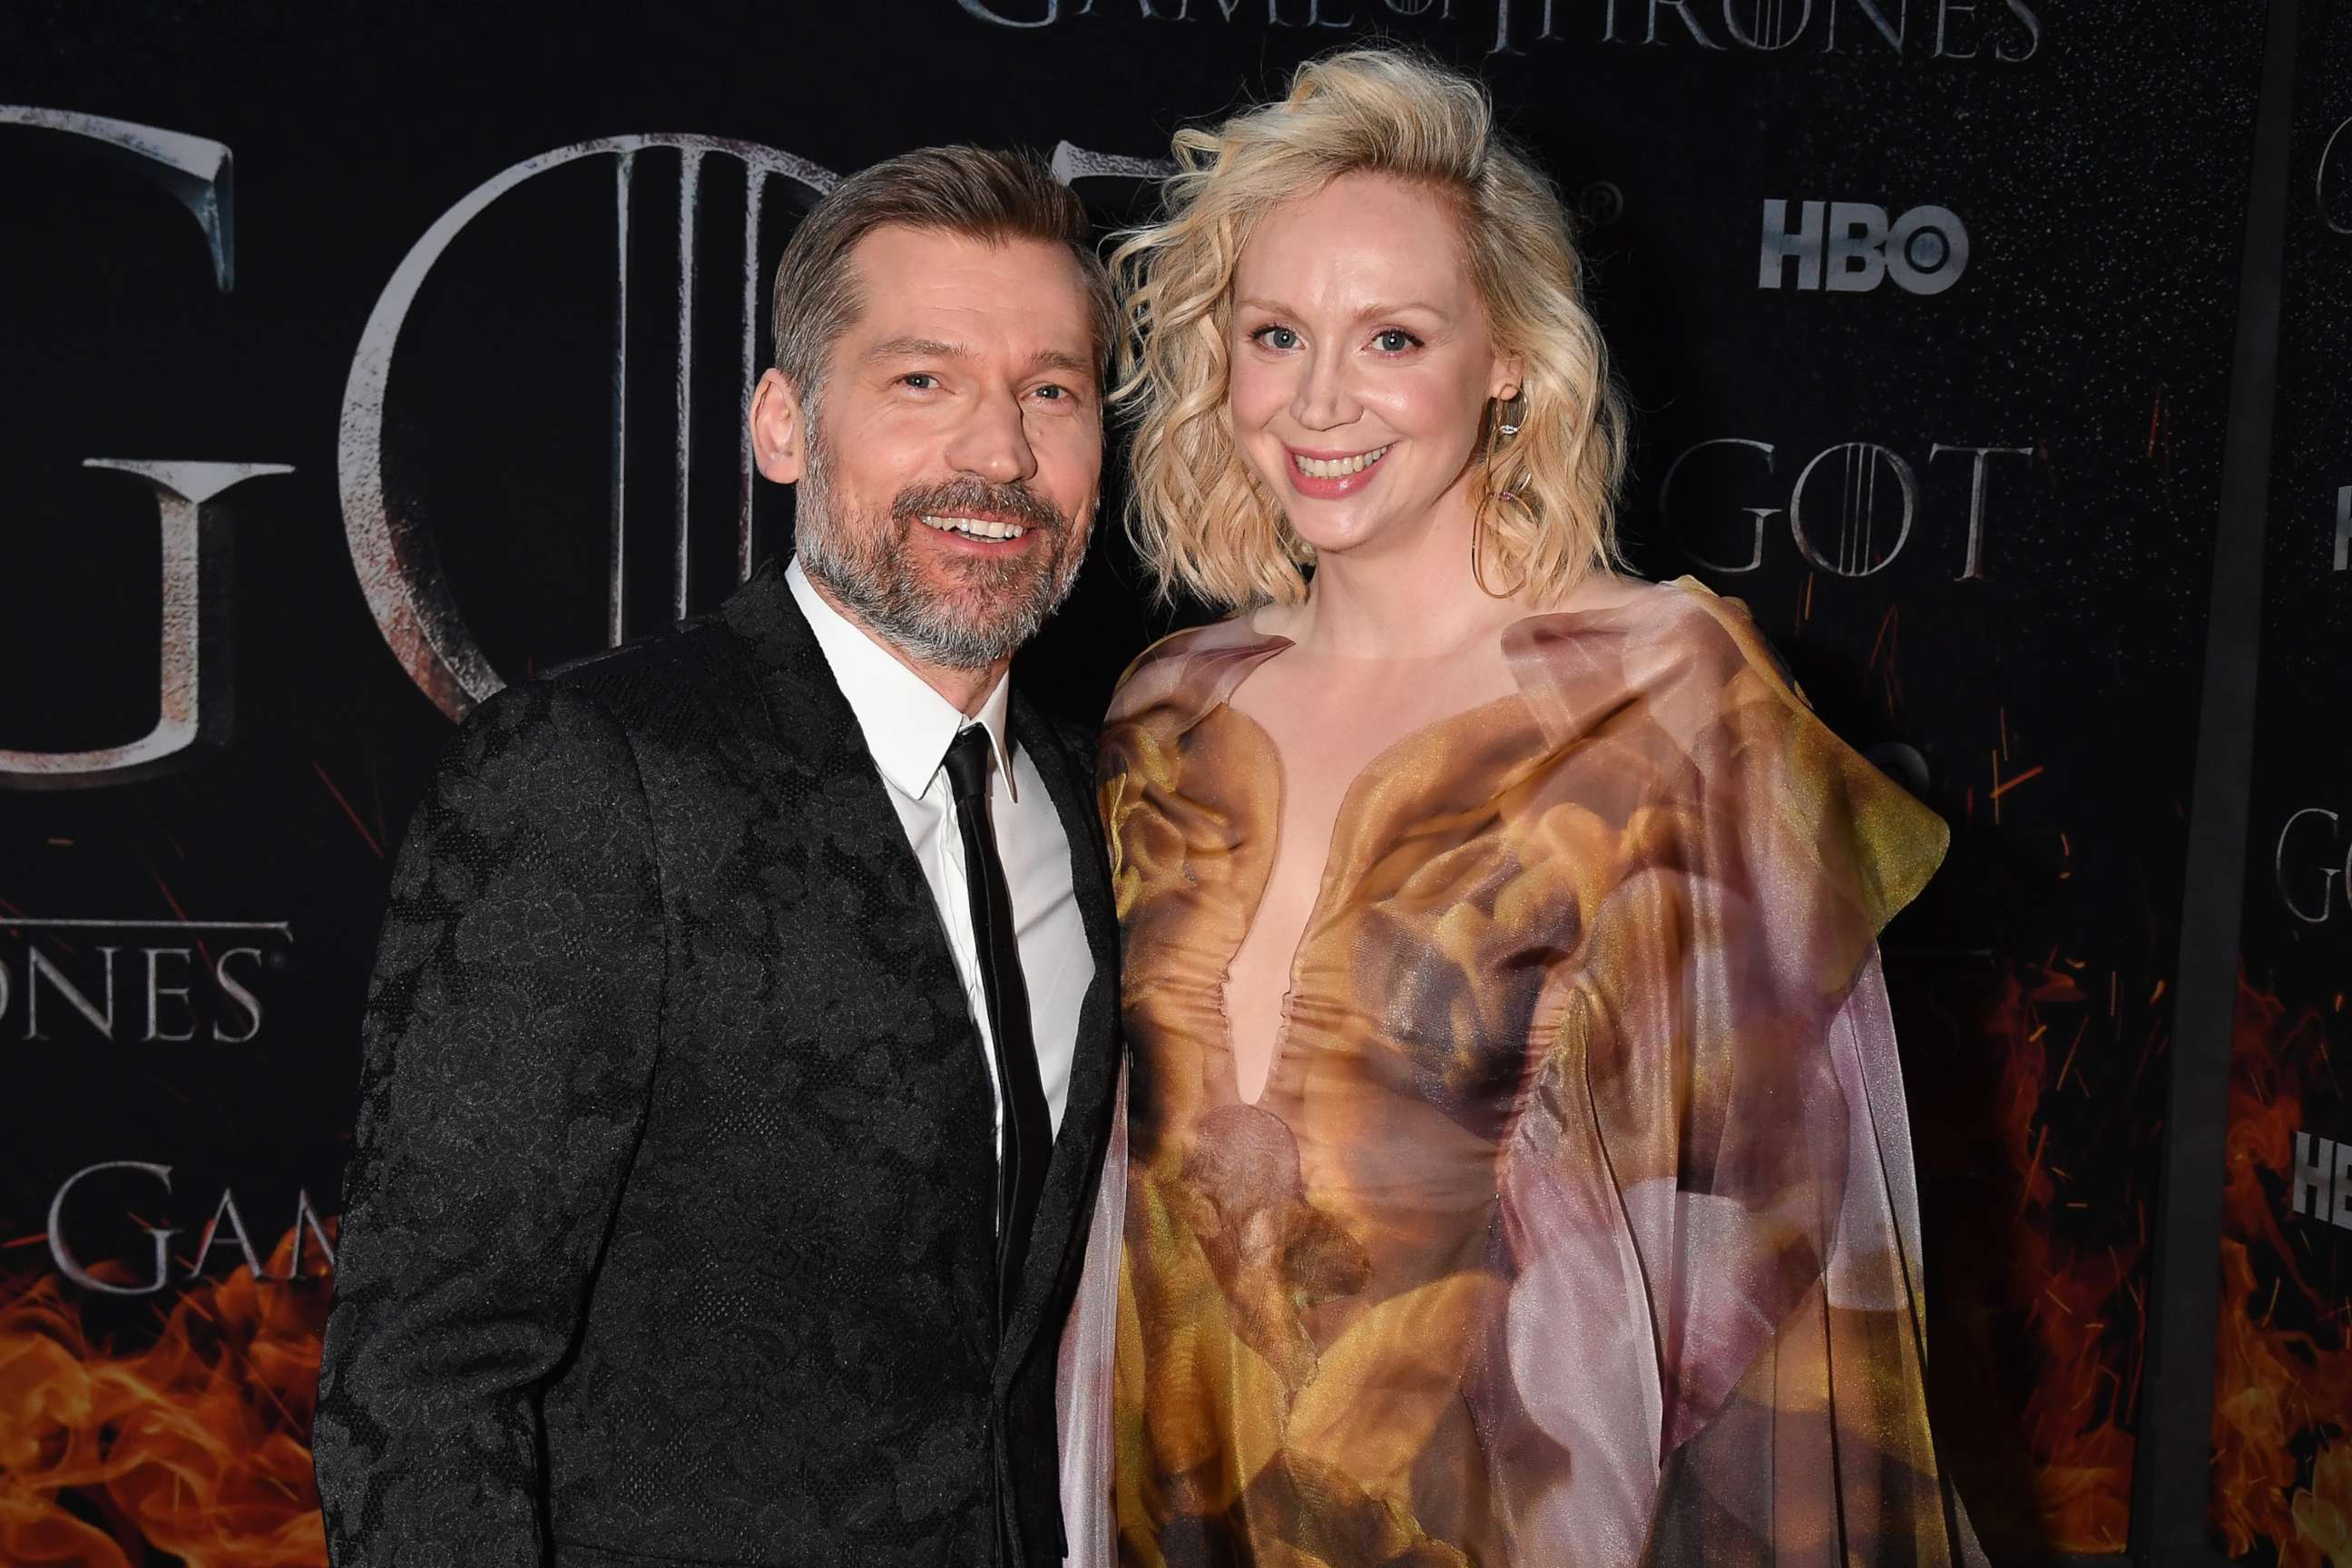 PHOTO: Nikolaj Coster-Waldau and Gwendoline Christie attend the "Game Of Thrones" Season 8 NY Premiere on April 3, 2019 in New York City. 